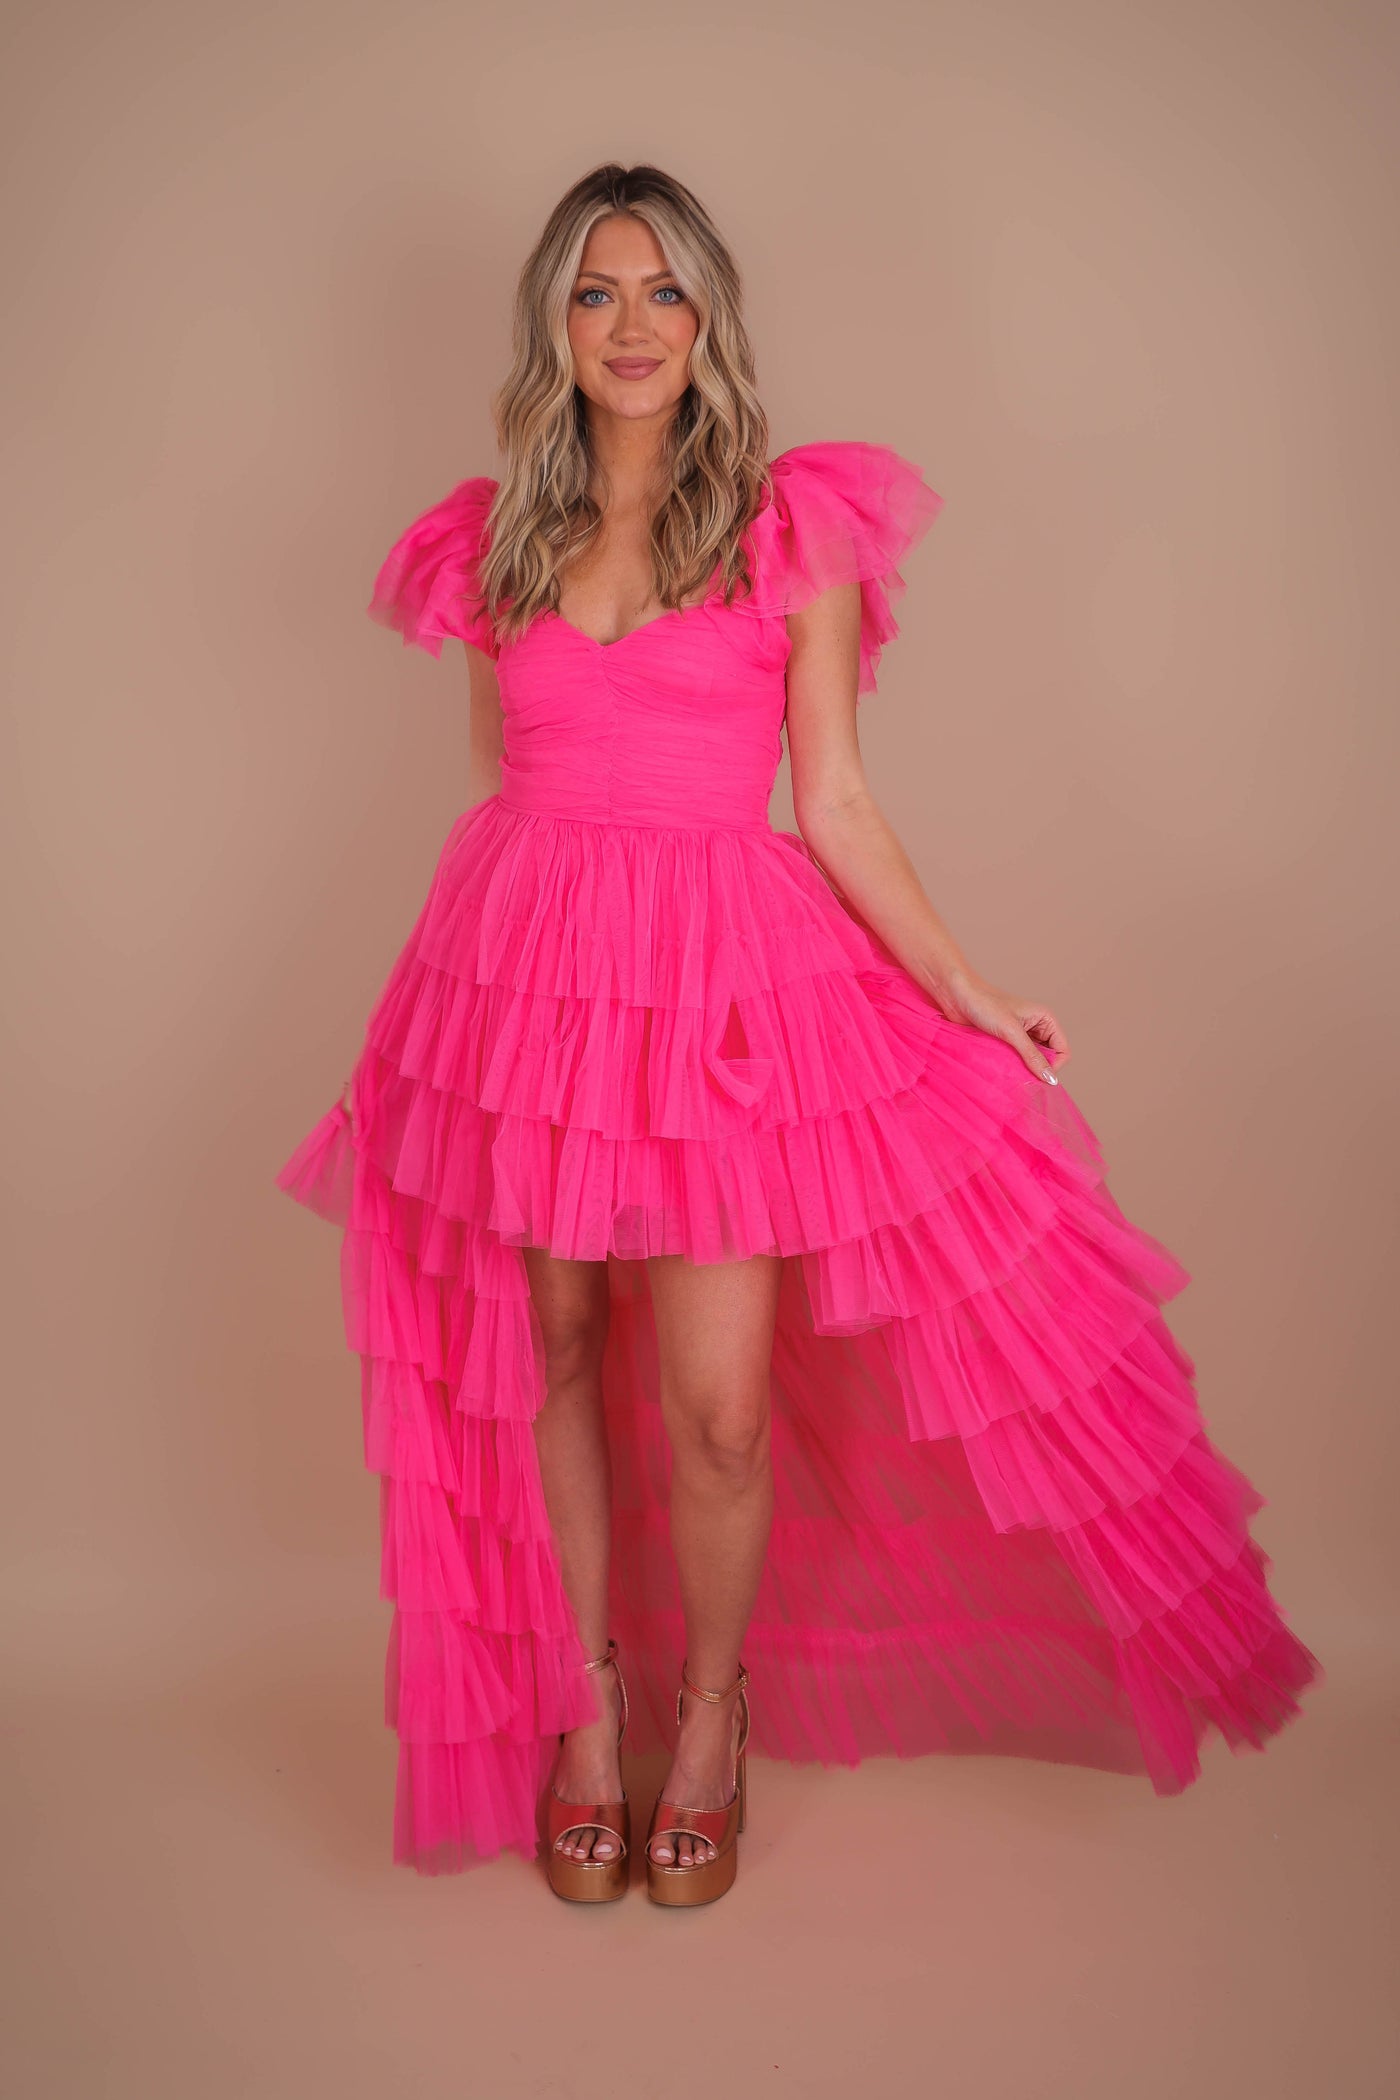 Women's Tulle Gown- Women's Hot Pink Tulle Maxi Dress- Luxxel Tulle Off The Shoulder Maxi 